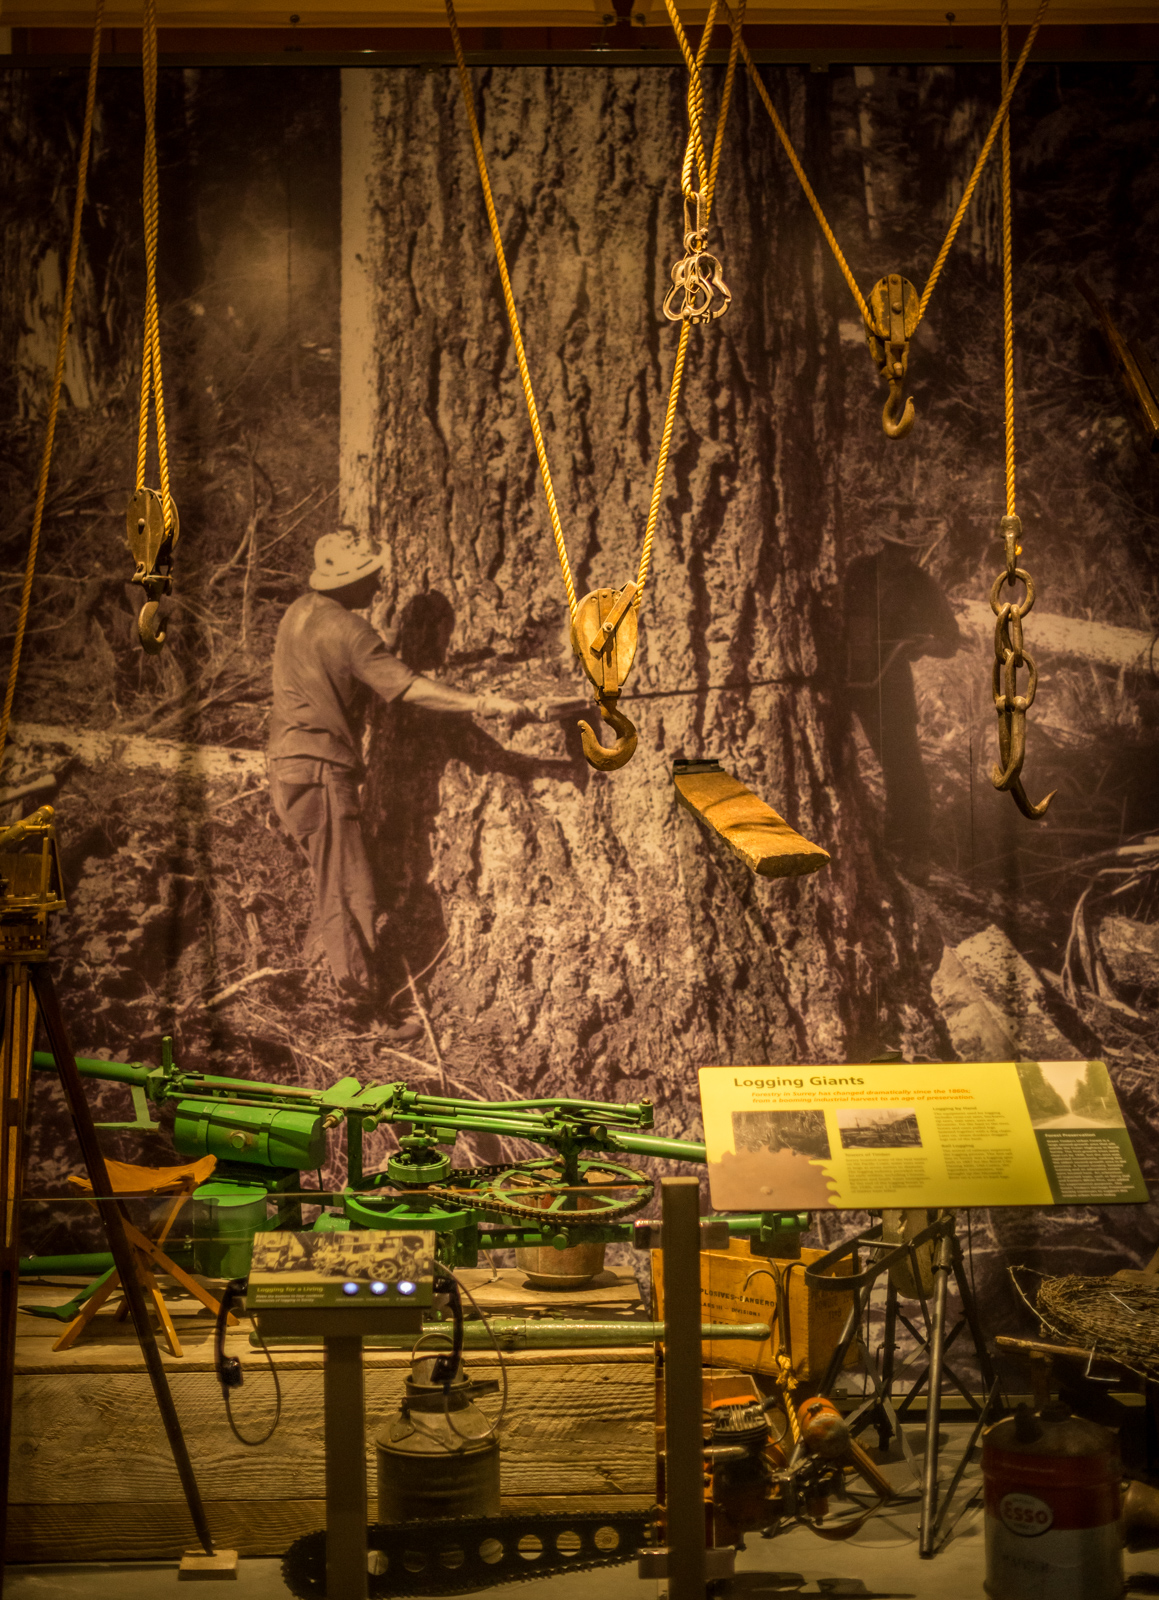 A display of lumber equipment in the ‘Surrey Stories Gallery’